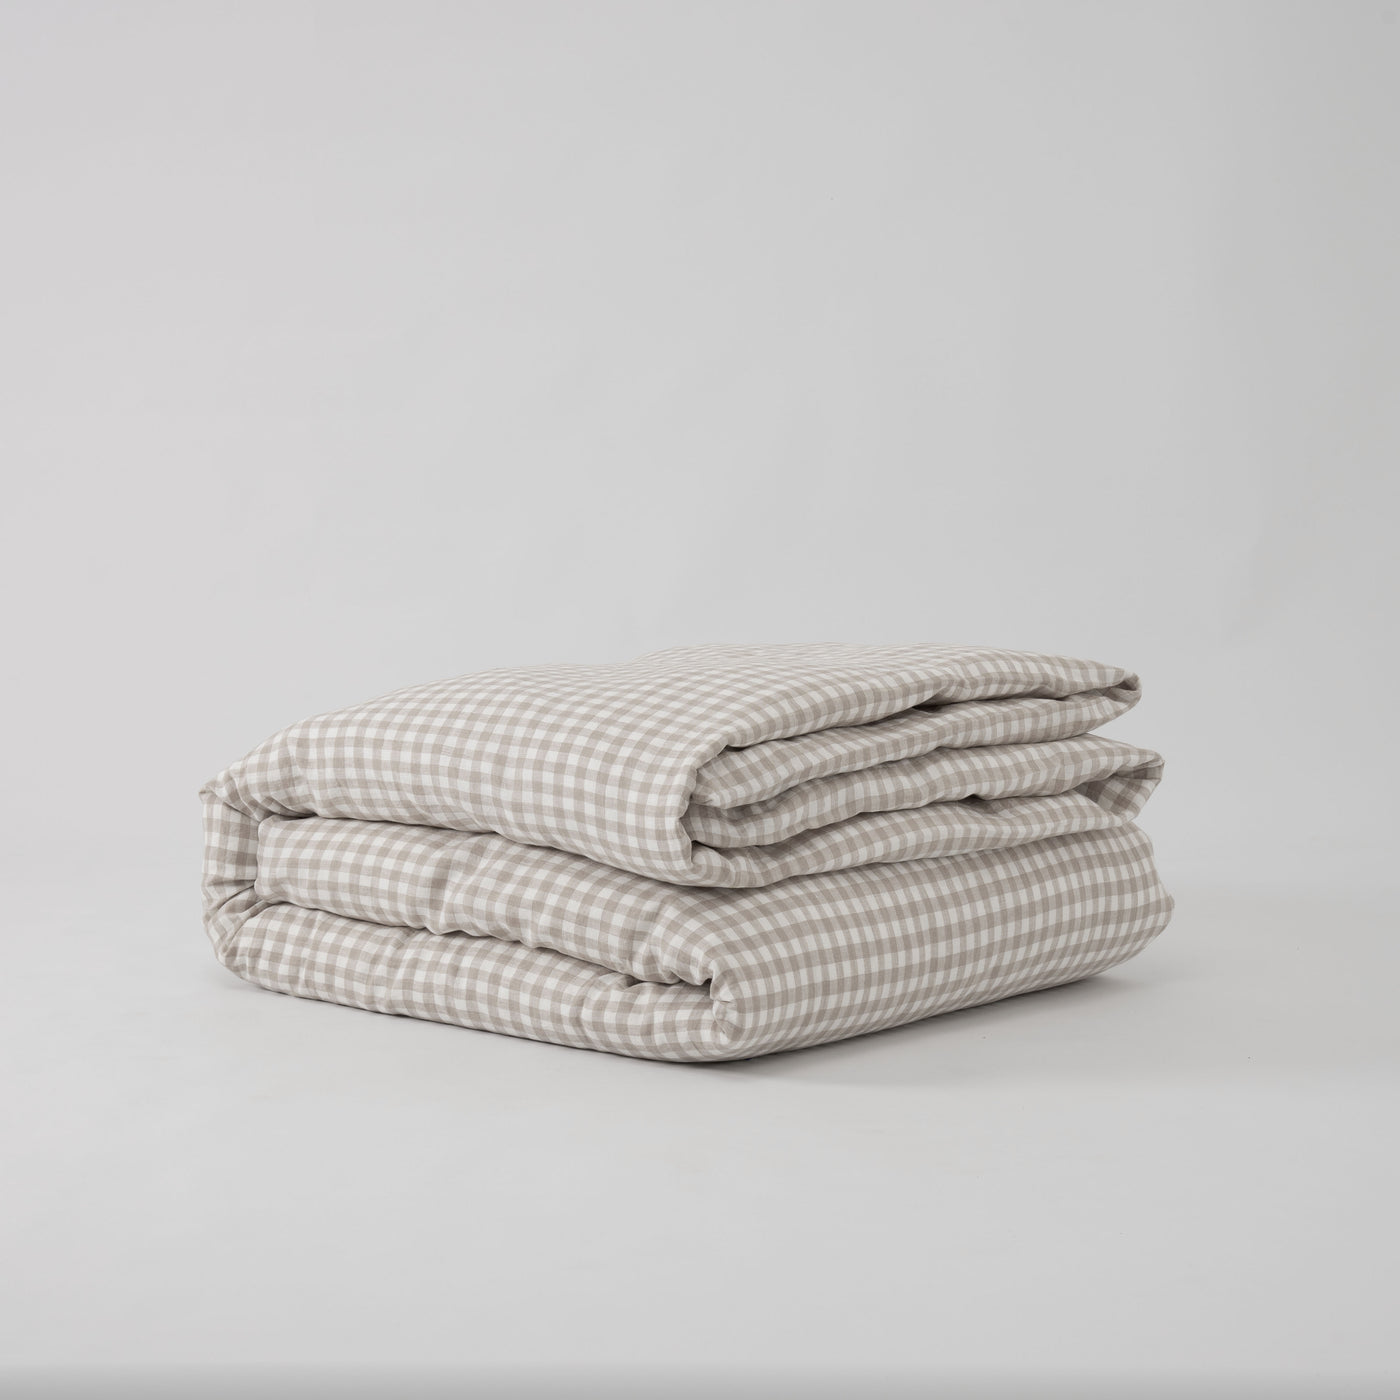 French Flax Linen Quilt Cover in Beige Gingham